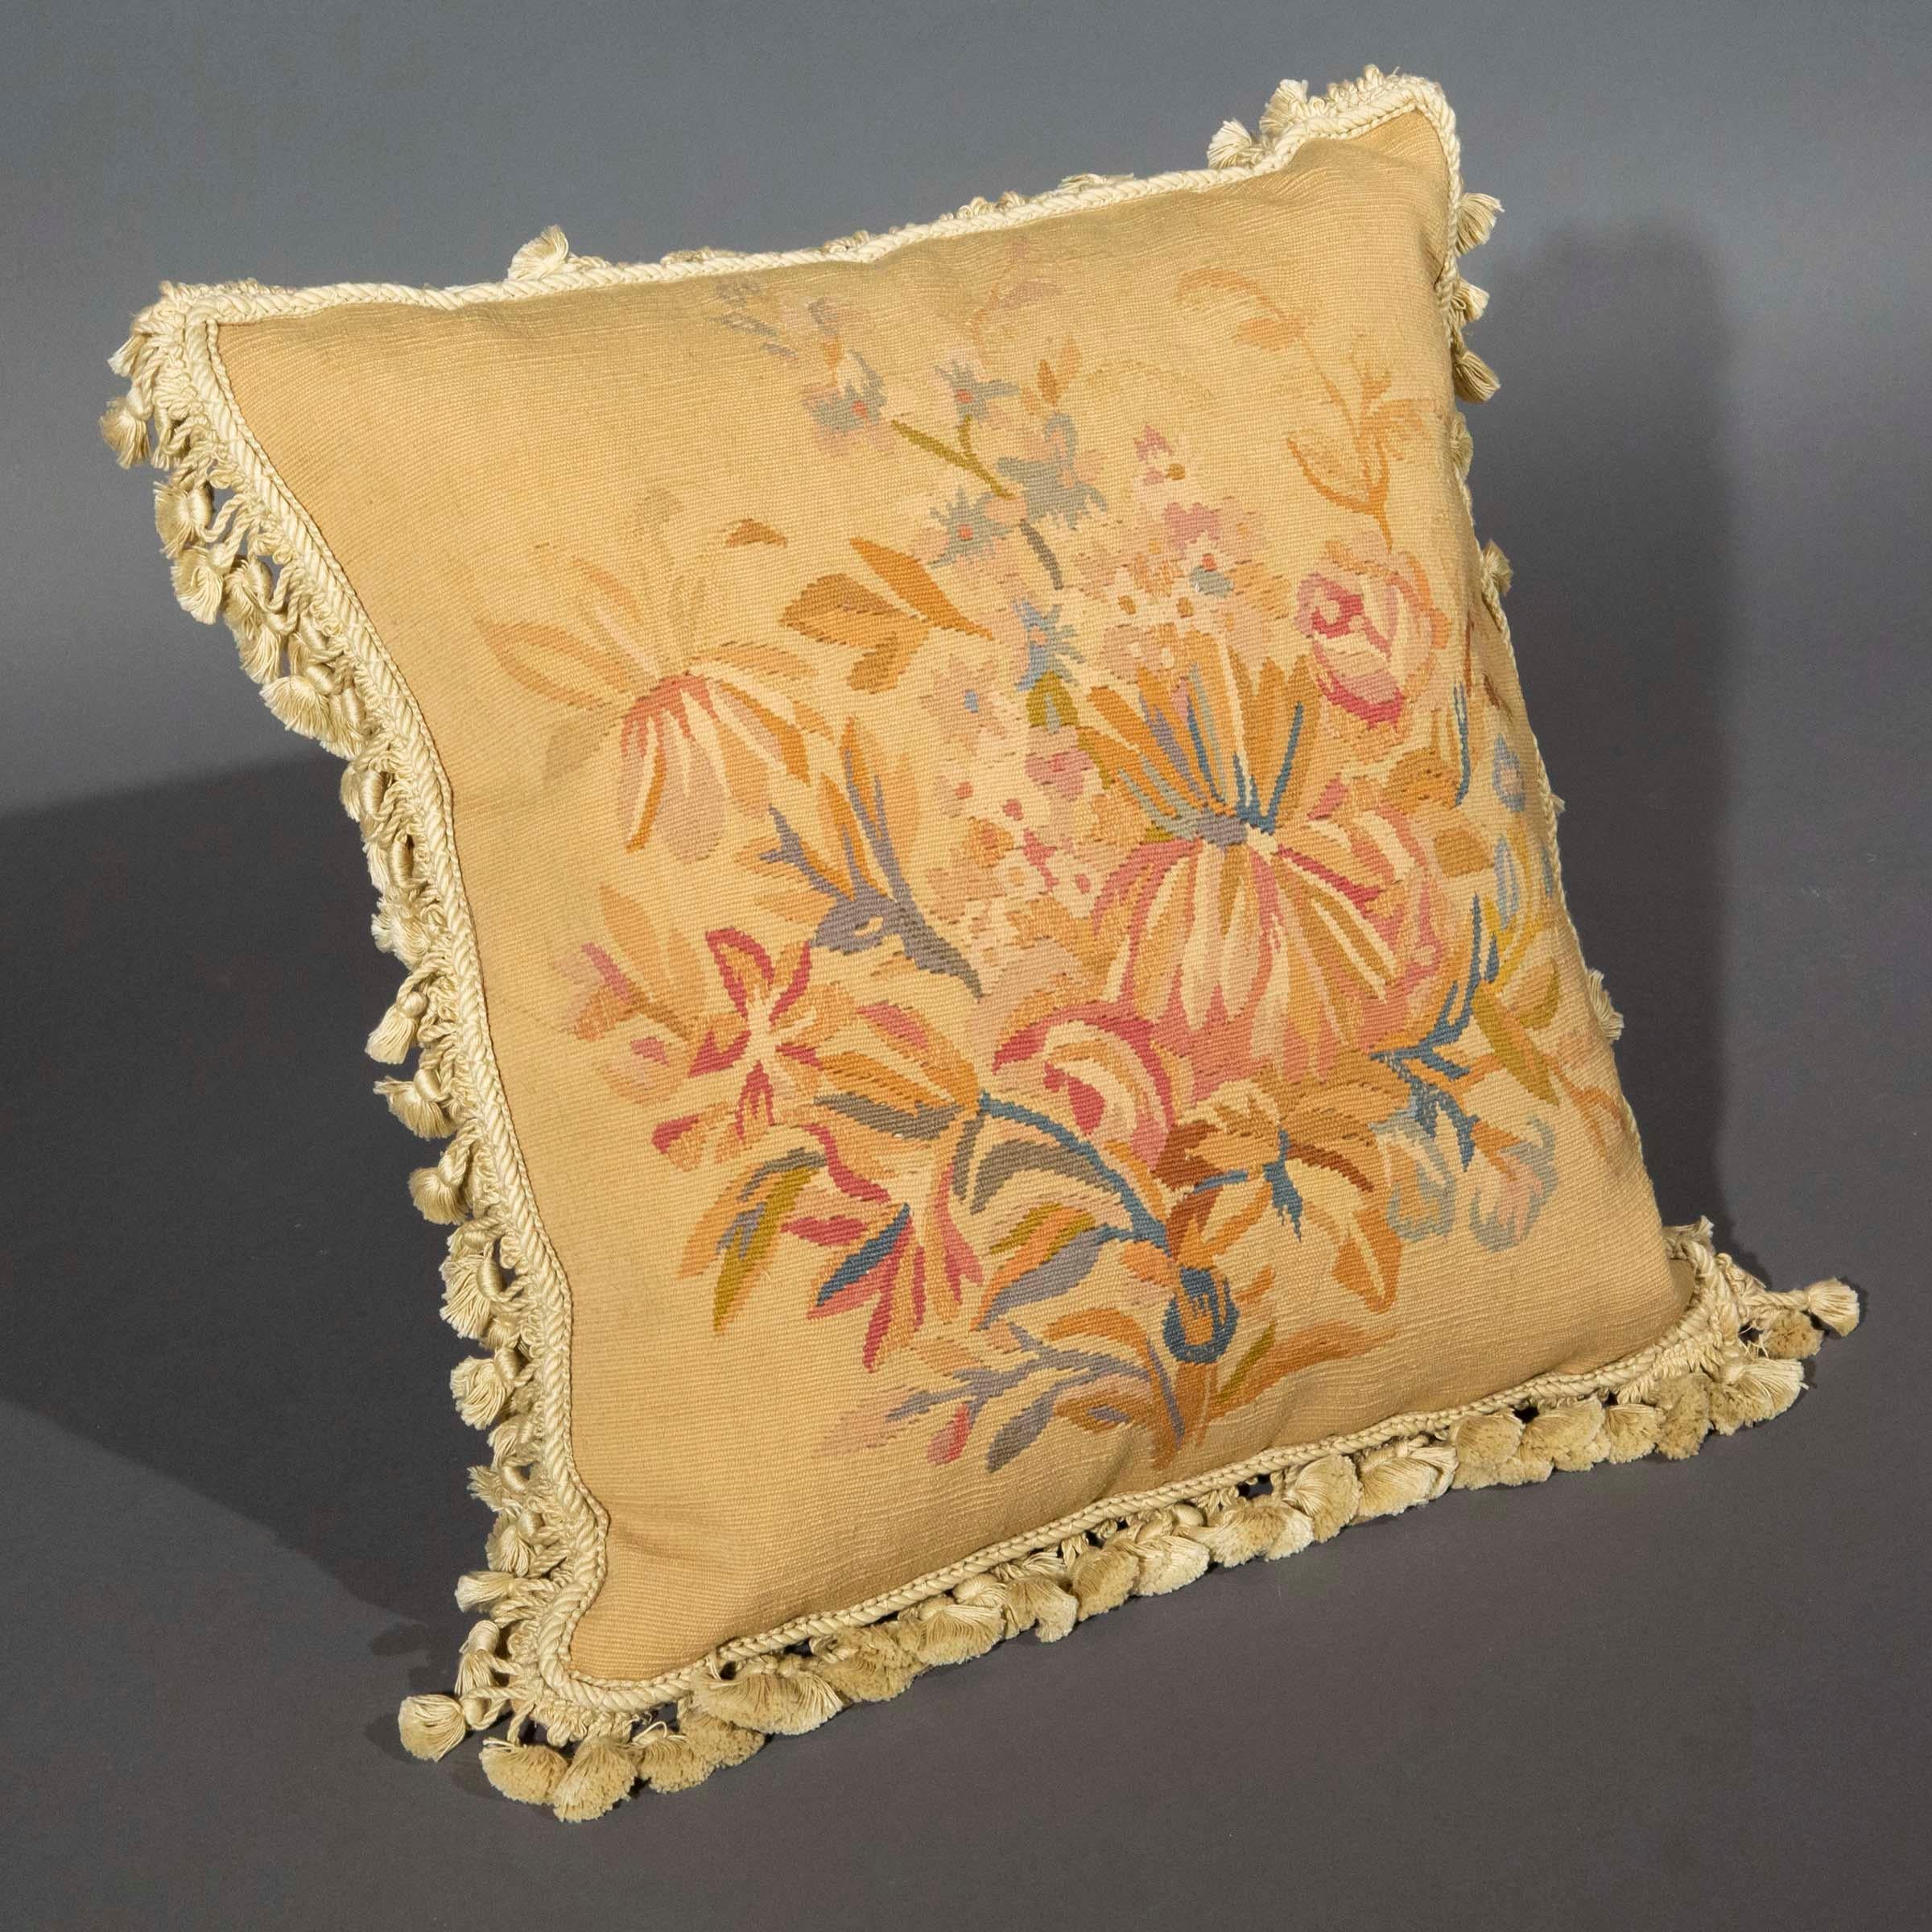 Wool Antique Tapestry Cushion 19th Century Floral Design For Sale